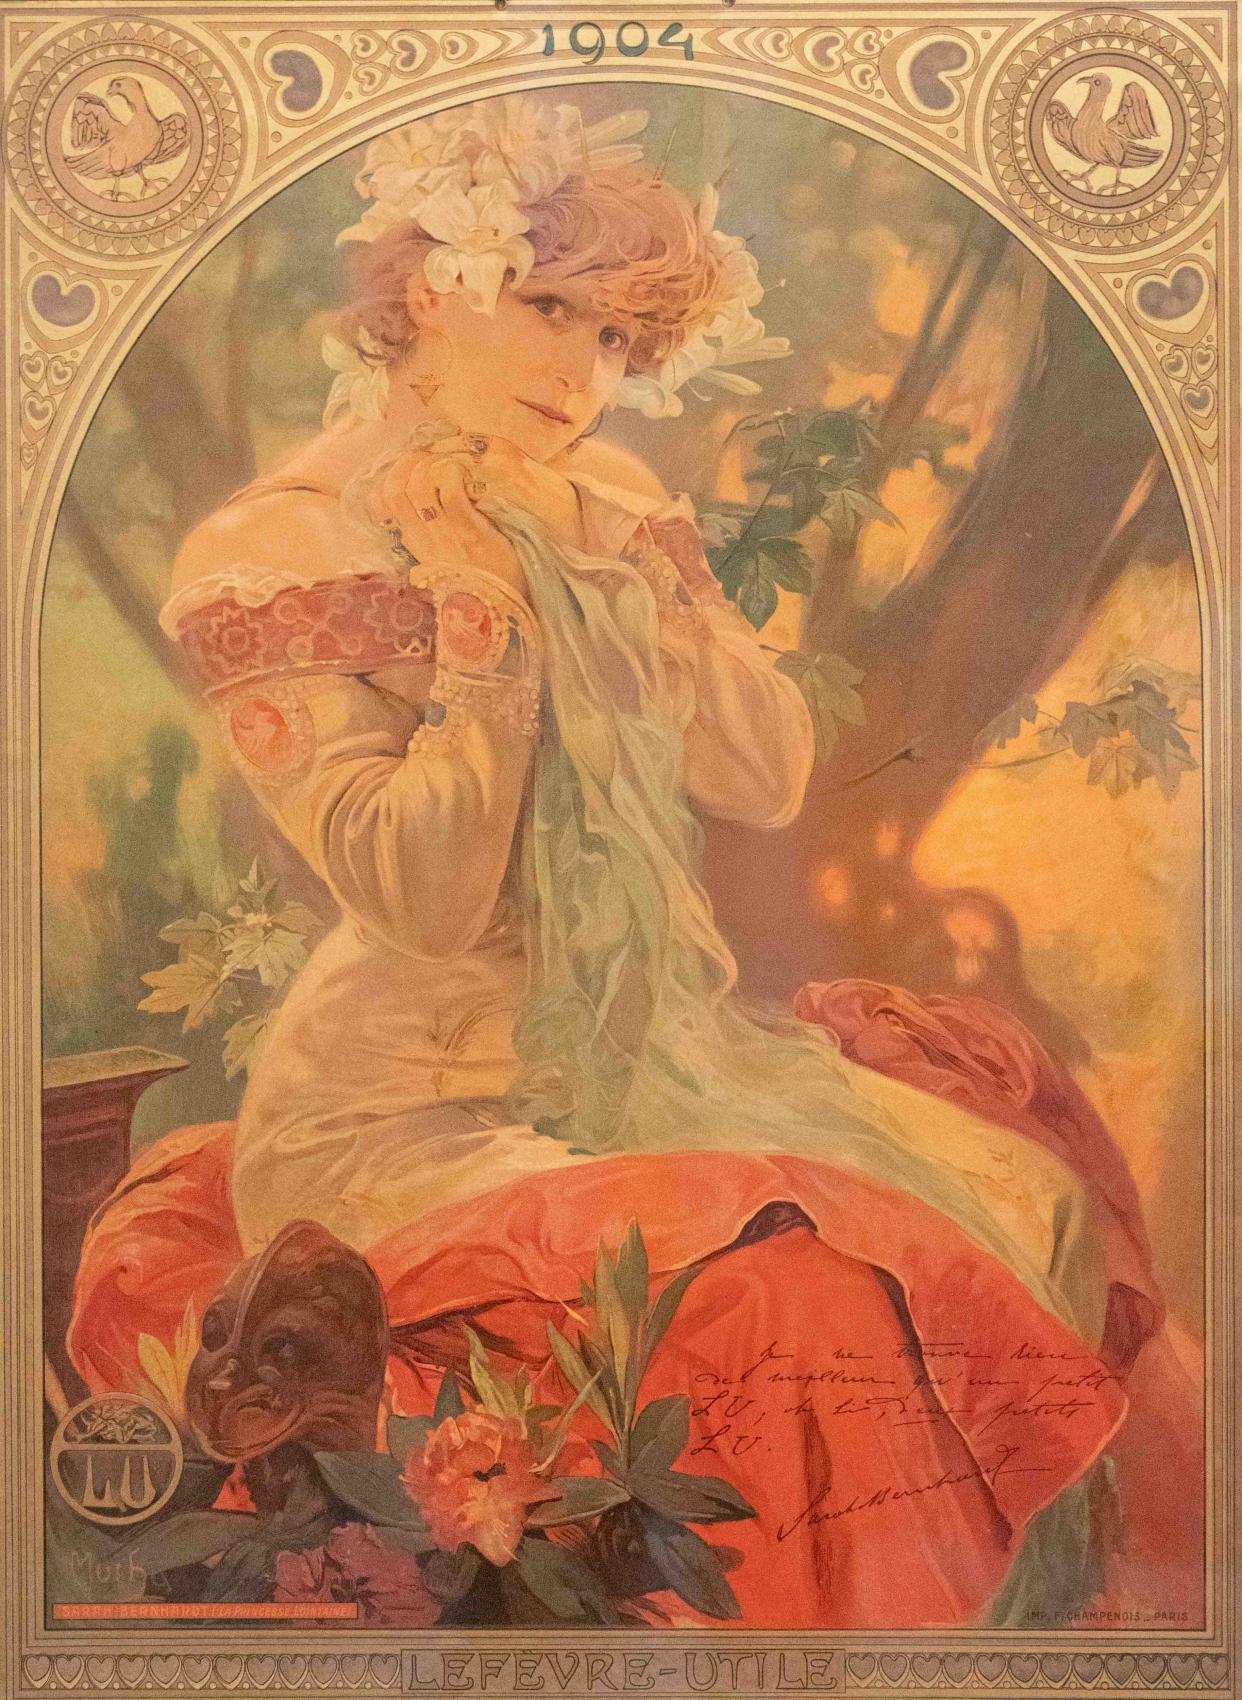 French actress Sarah Bernhardt, depicted here in a 1903 color lithograph, was one of Alphonse Mucha's favorite models.